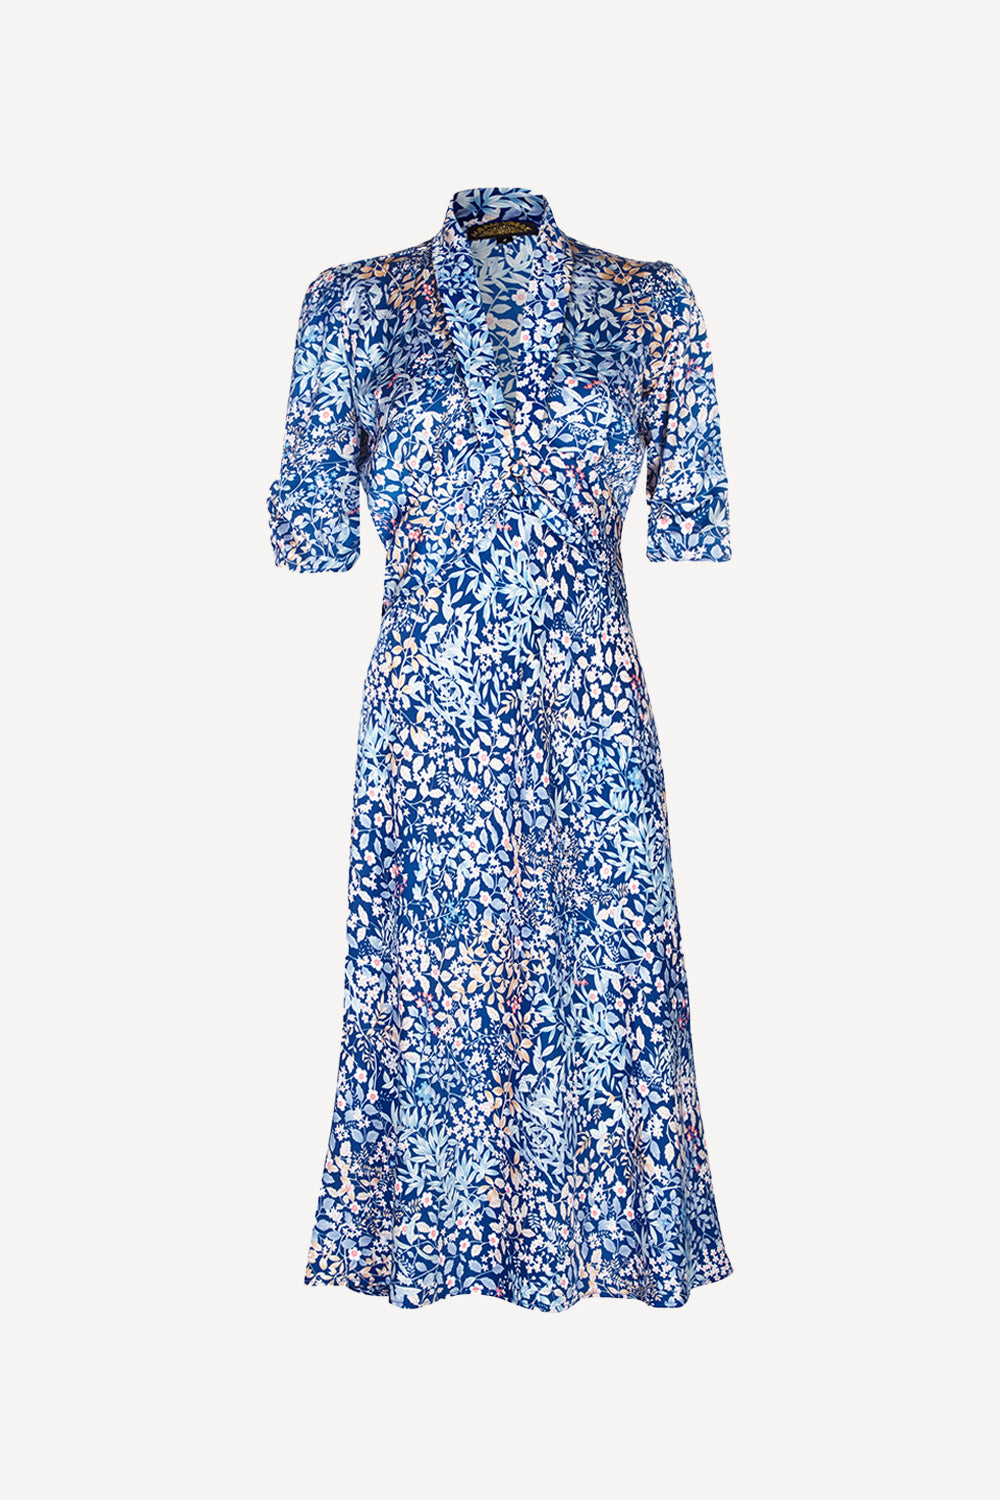 Sable dress in blue floral